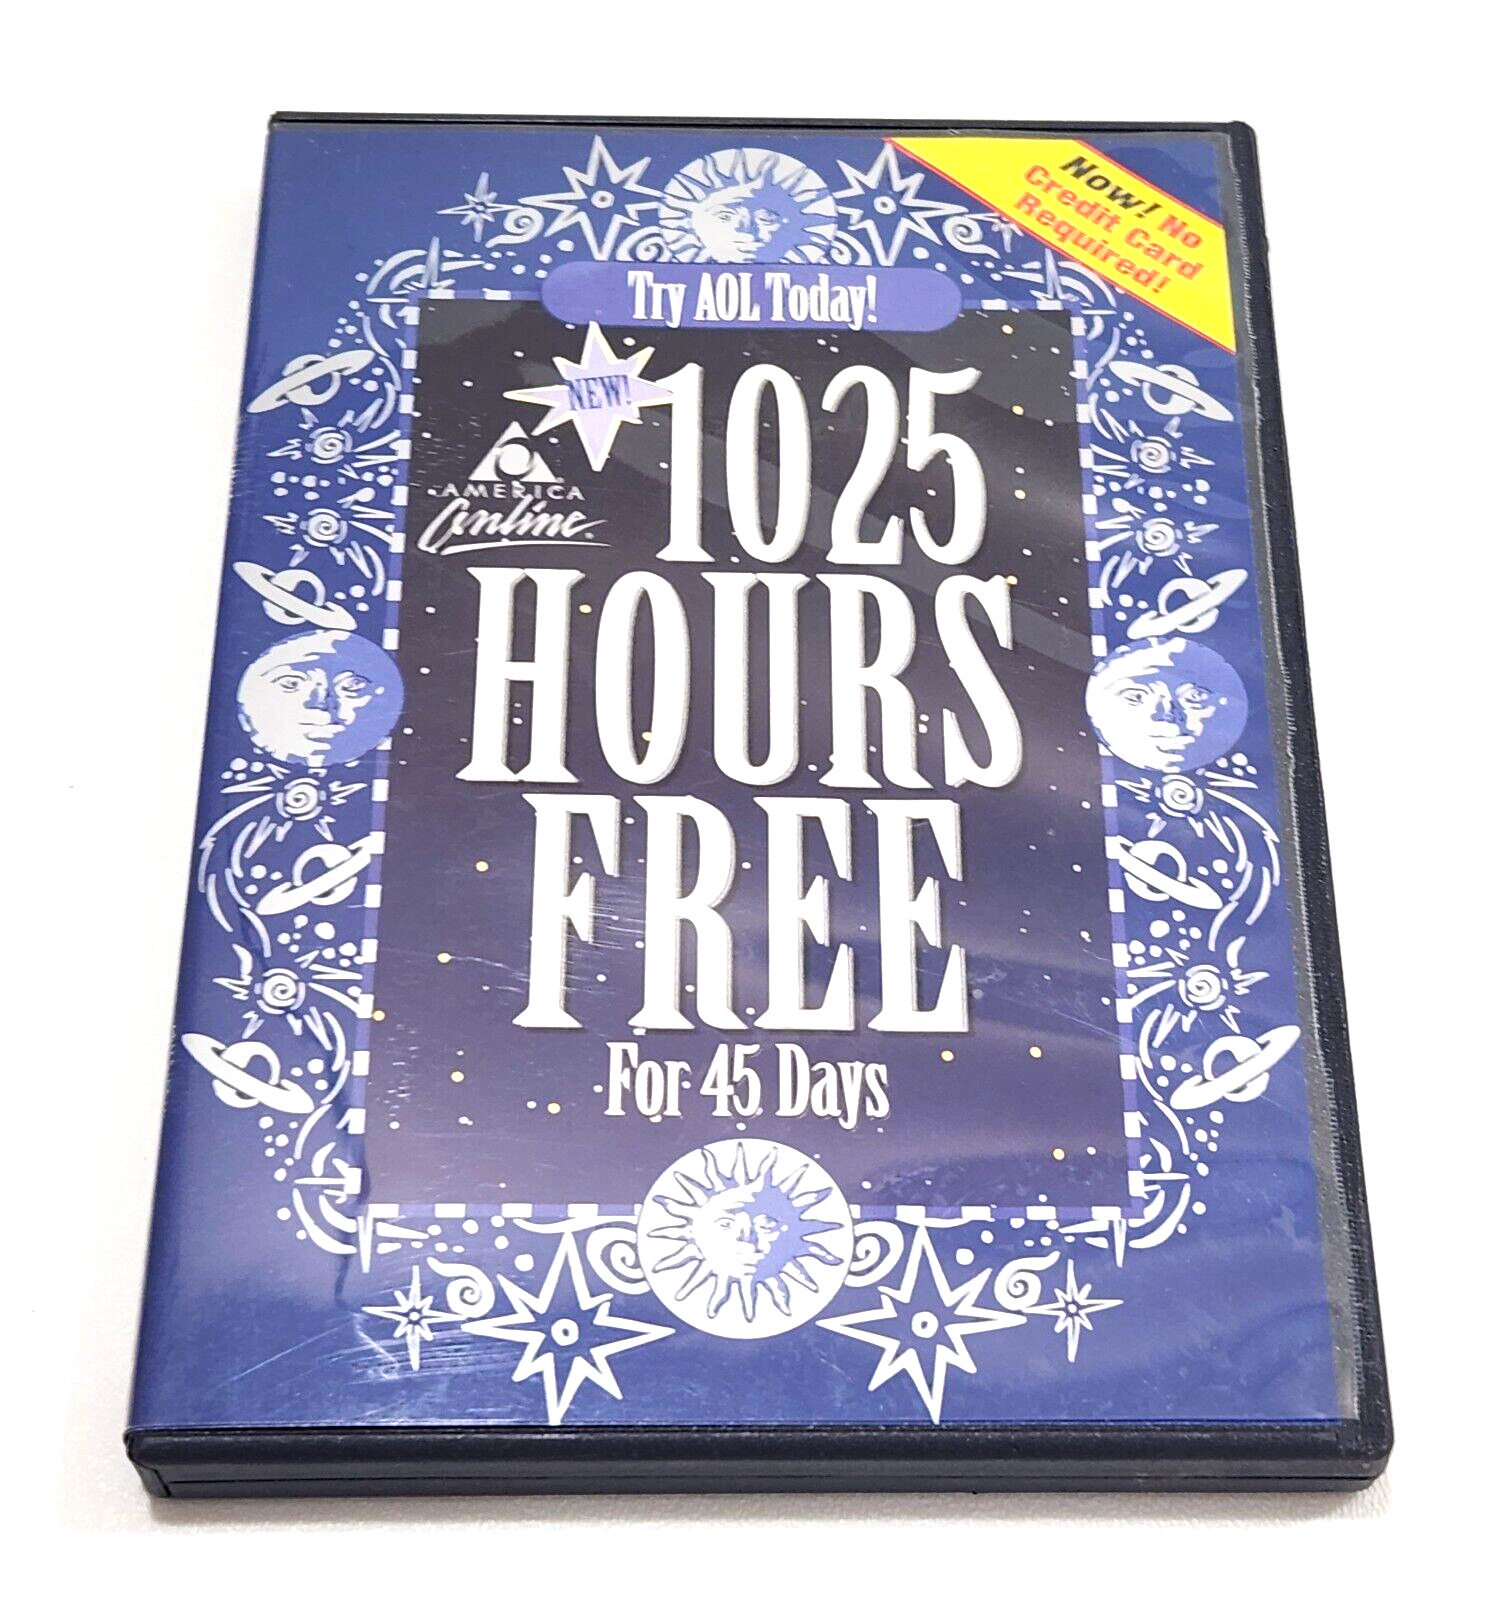 America Online Installation CD 1025 Hours Free For 45 Days Try AOL Today 2000